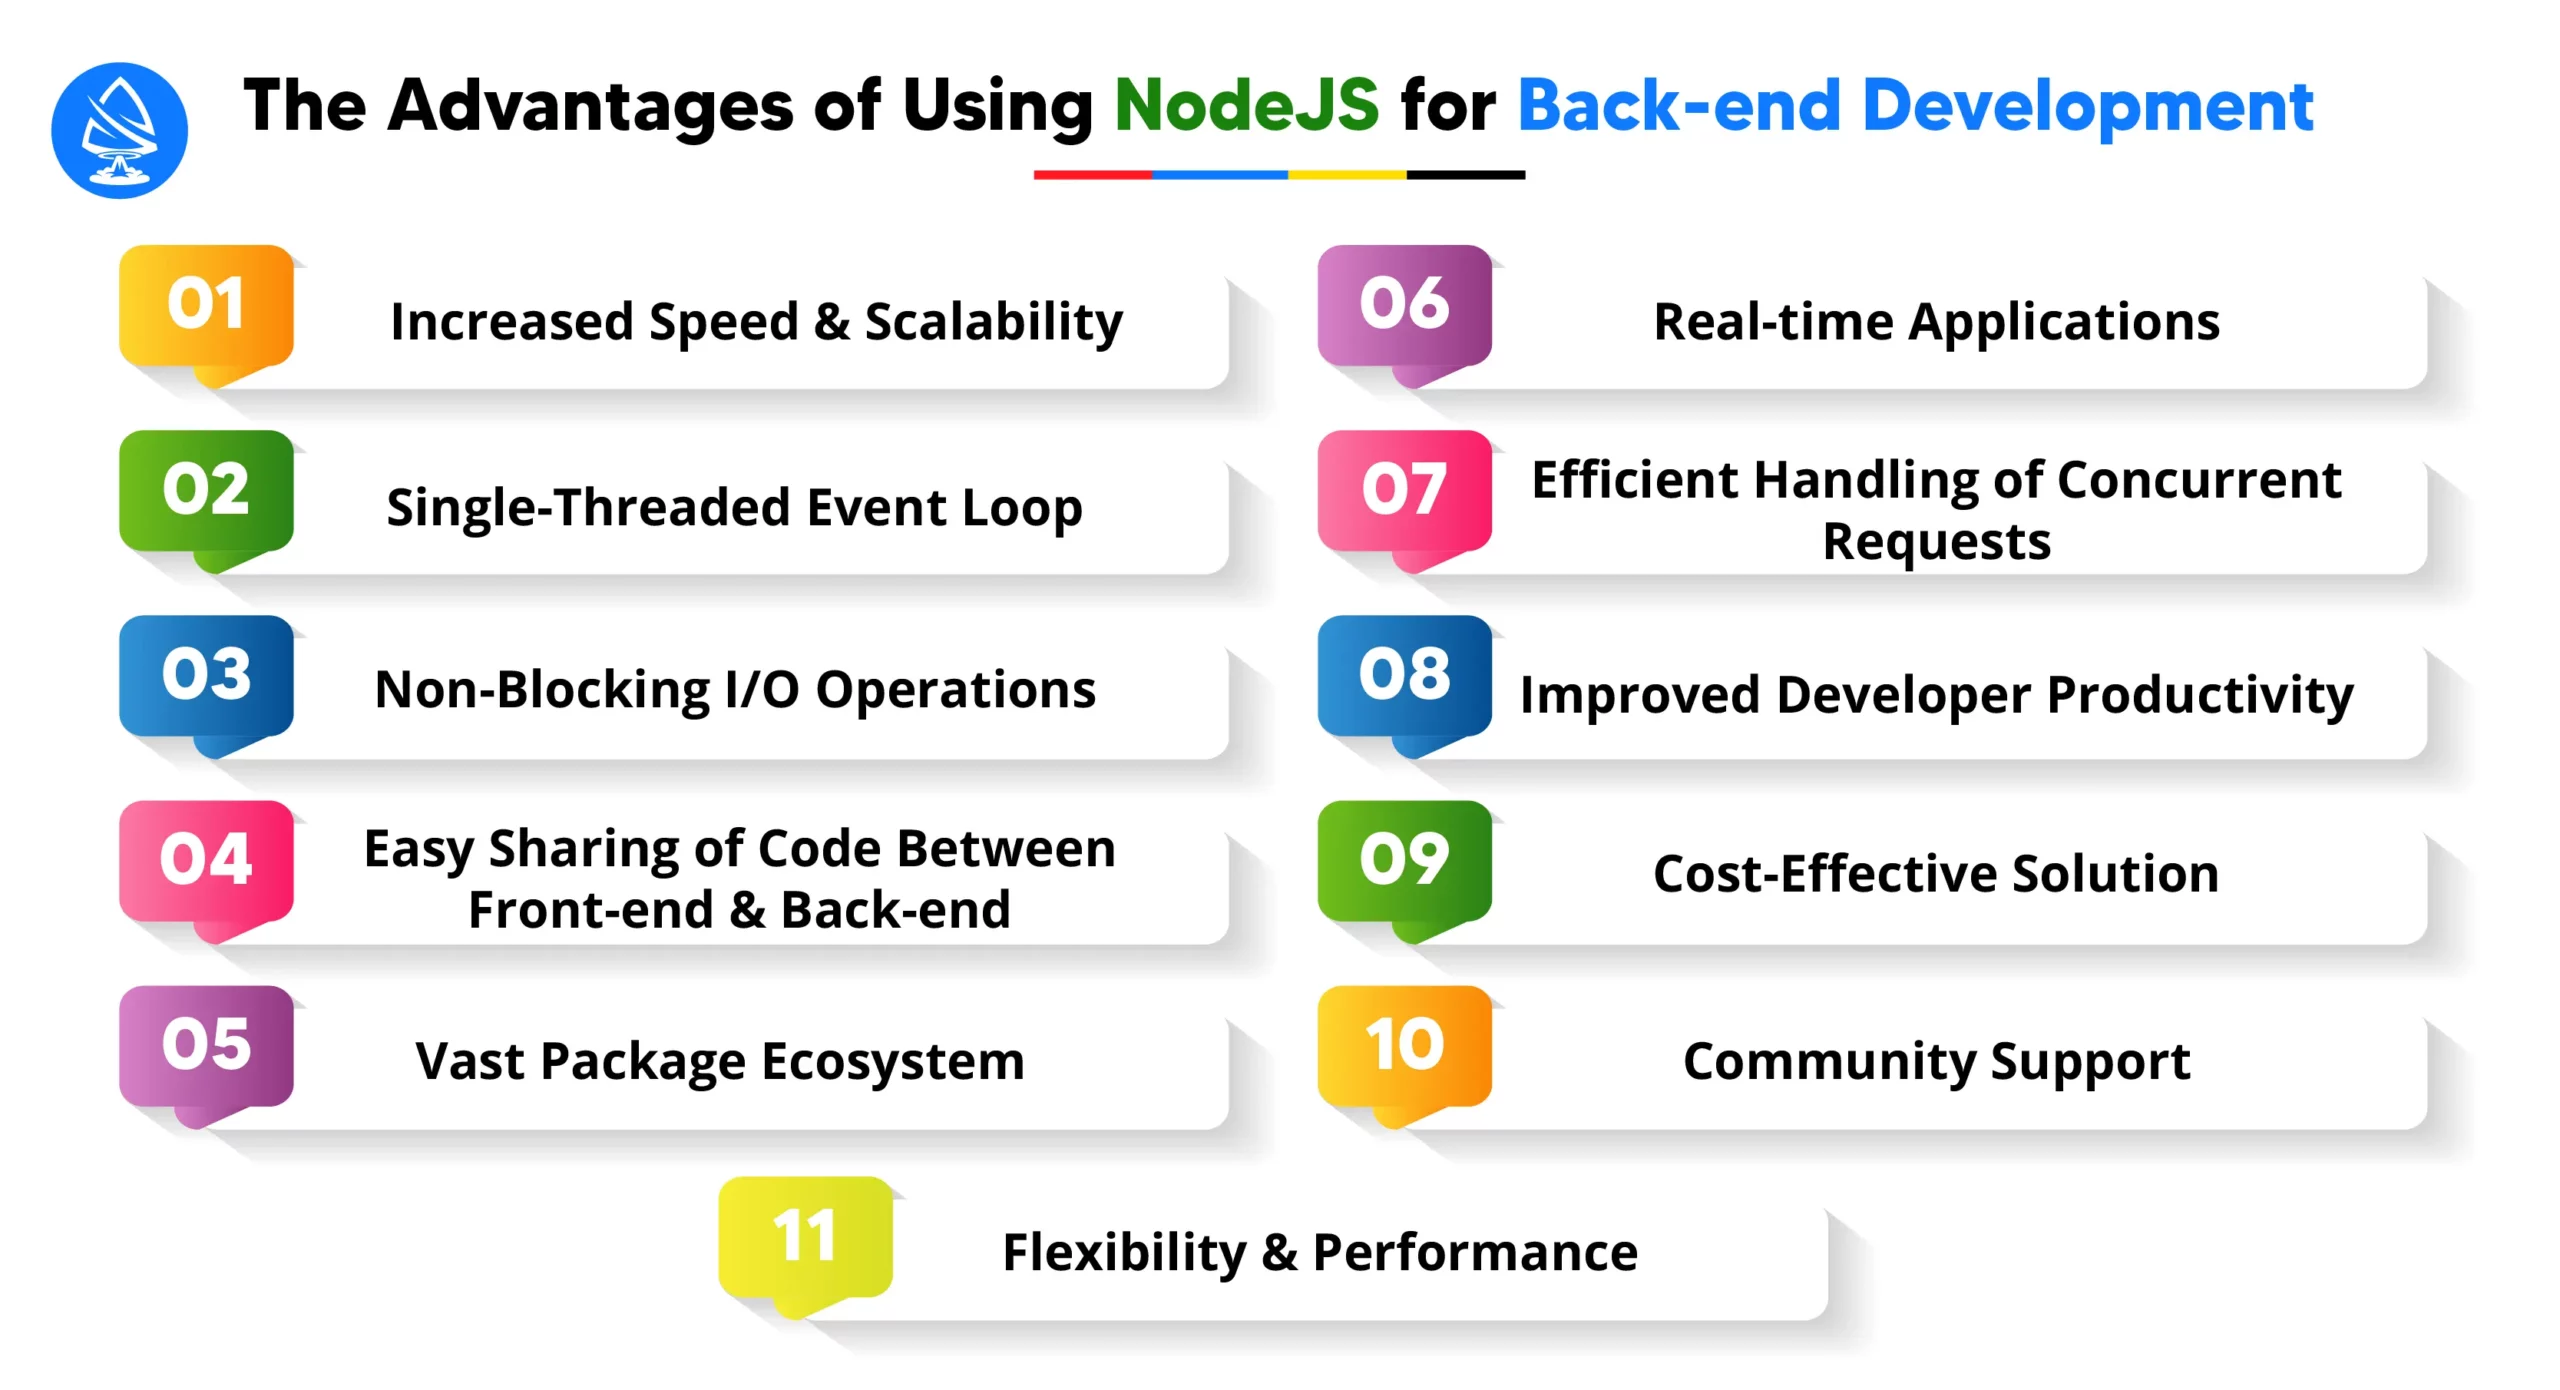 The Advantages of Using NodeJS for Backend Development